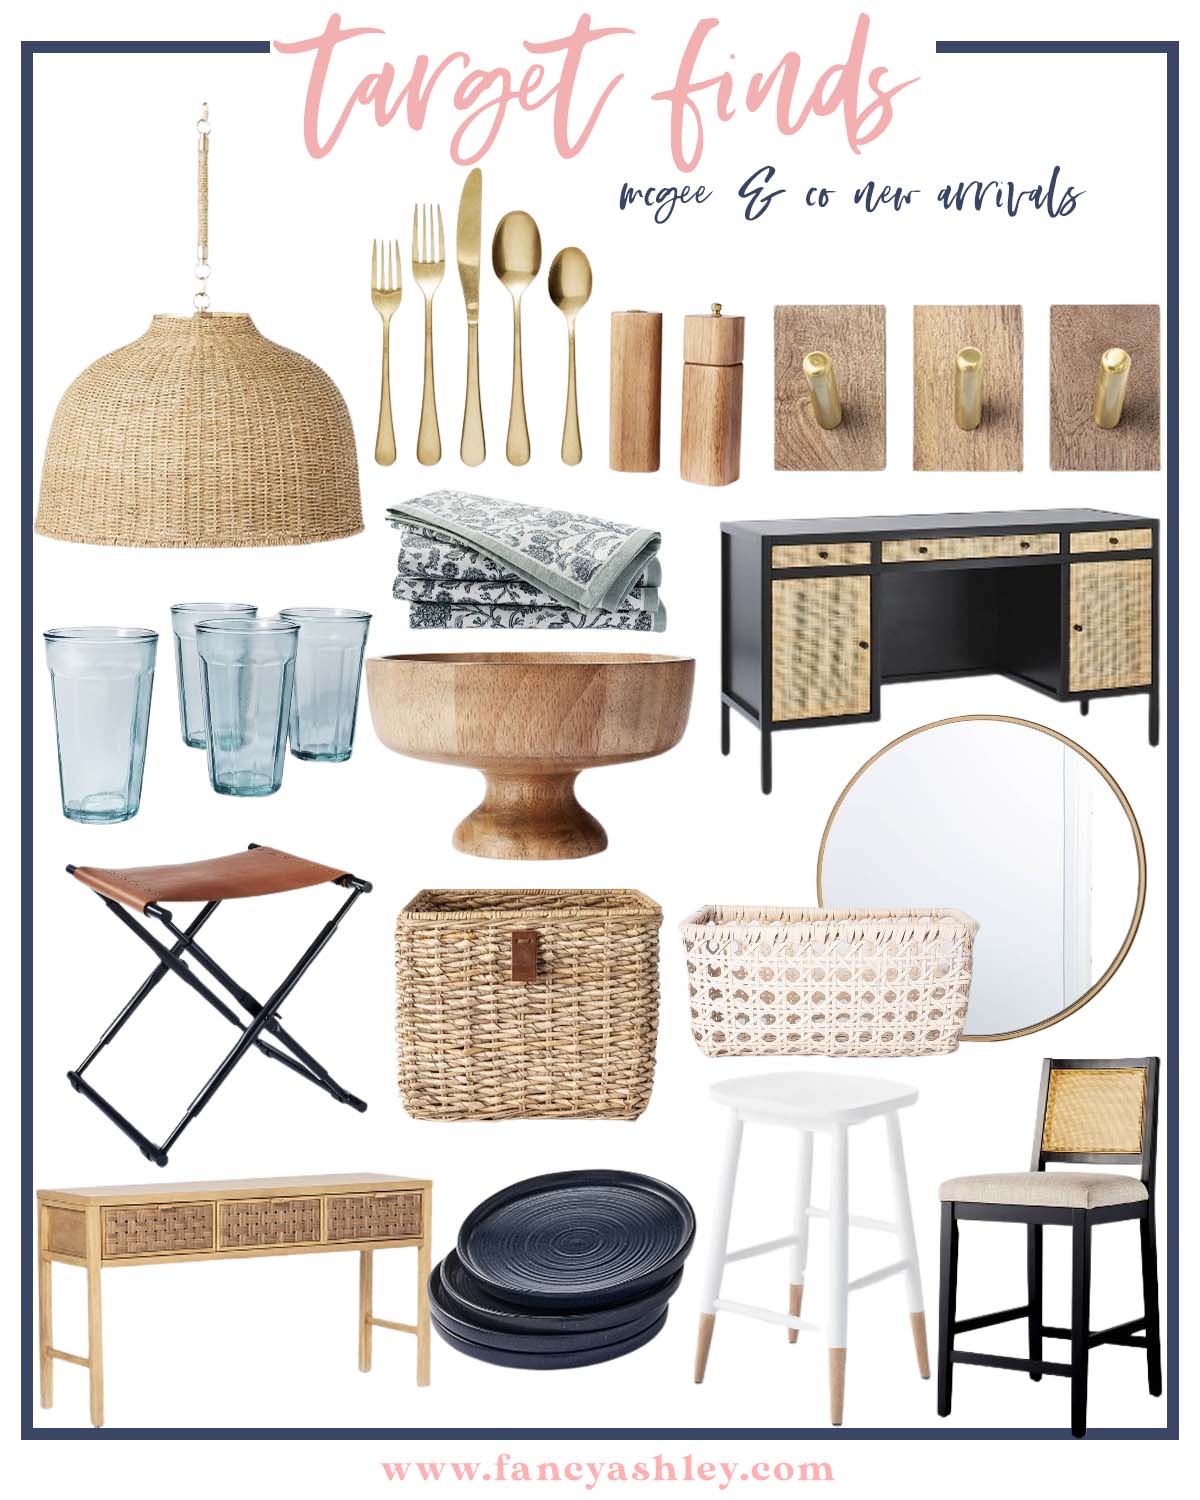 McGee & Co by popular Houston life and style blog, Fancy Ashley: collage image of McGee & Co blue glasses, McGee & Co gold flatware, McGee & Co gold and wood wall hooks, McGee and Co round mirror, McGee & Co, floral print cloth napkins, McGee & Co blue stool, McGee & Co wooden salt and pepper grinders, McGee & Co white wicker basket, McGee & Co wooden bowl, McGee & Co black plates, McGee & Co black stool, McGee & Co console table, McGee & Co wicker pendant light, and McGee & Co leather seat. 